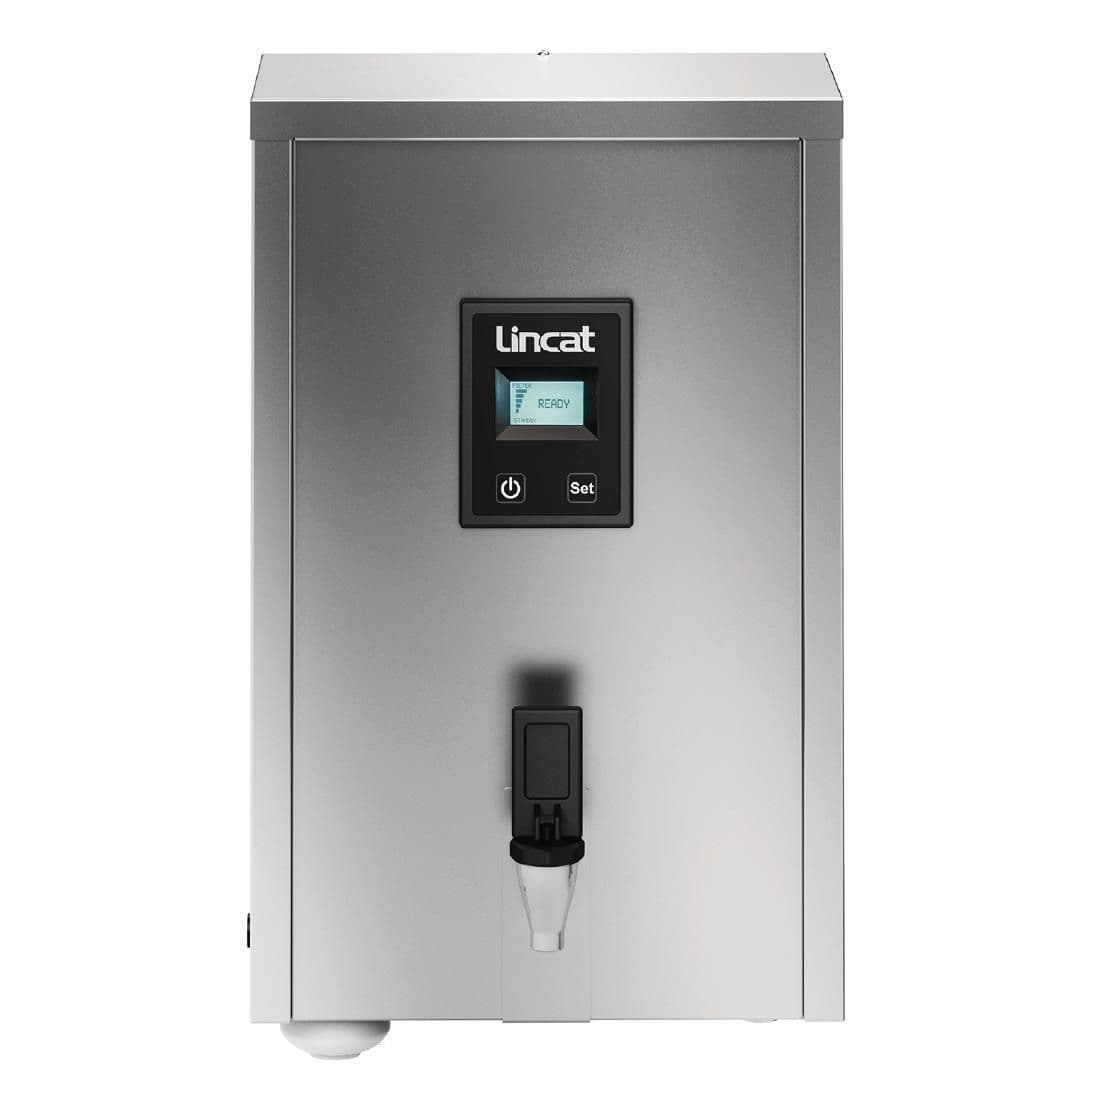 M7F - Lincat FilterFlow MF Wall Mounted Automatic Fill Boiler - 7.5L Capacity - 3.0 kW JD Catering Equipment Solutions Ltd